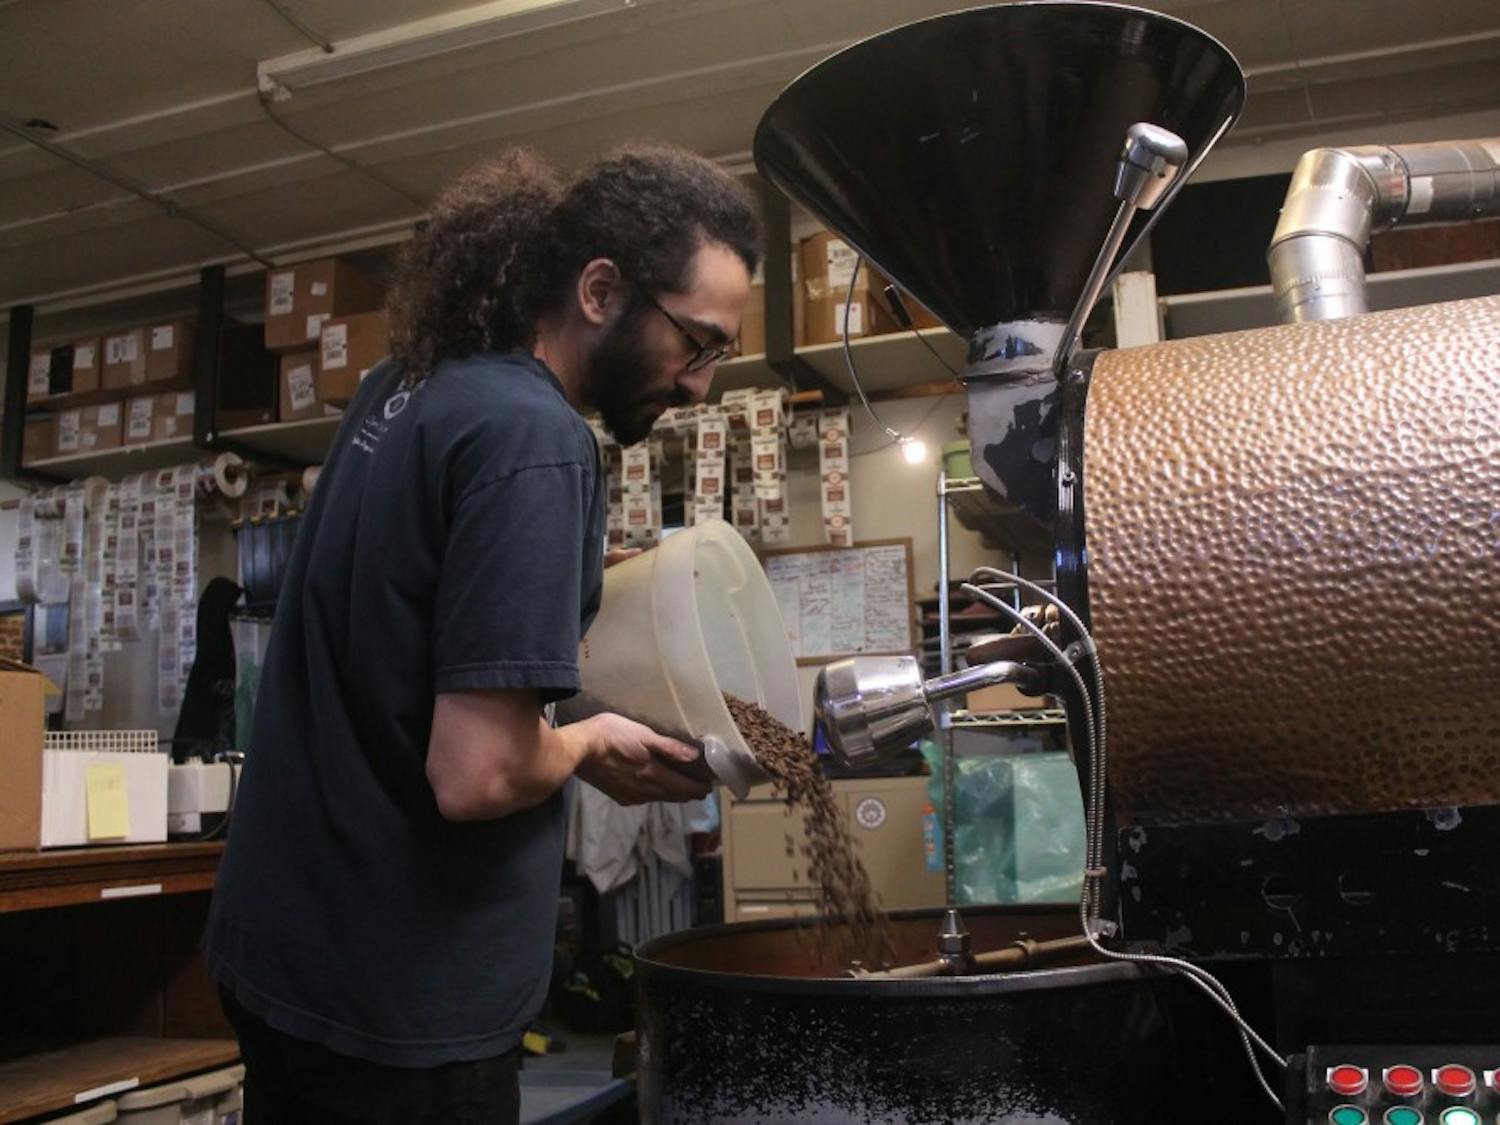 Carrboro Coffee Roaster's employee, David Ruiz, works on roasting coffee for Open Eye Cafe on the afternoon of Wednesday, Jan. 16, 2019. Carrboro Coffee Roasters is one of the many companies in Orange County that are an Orange County Certified Living Wage Employer.